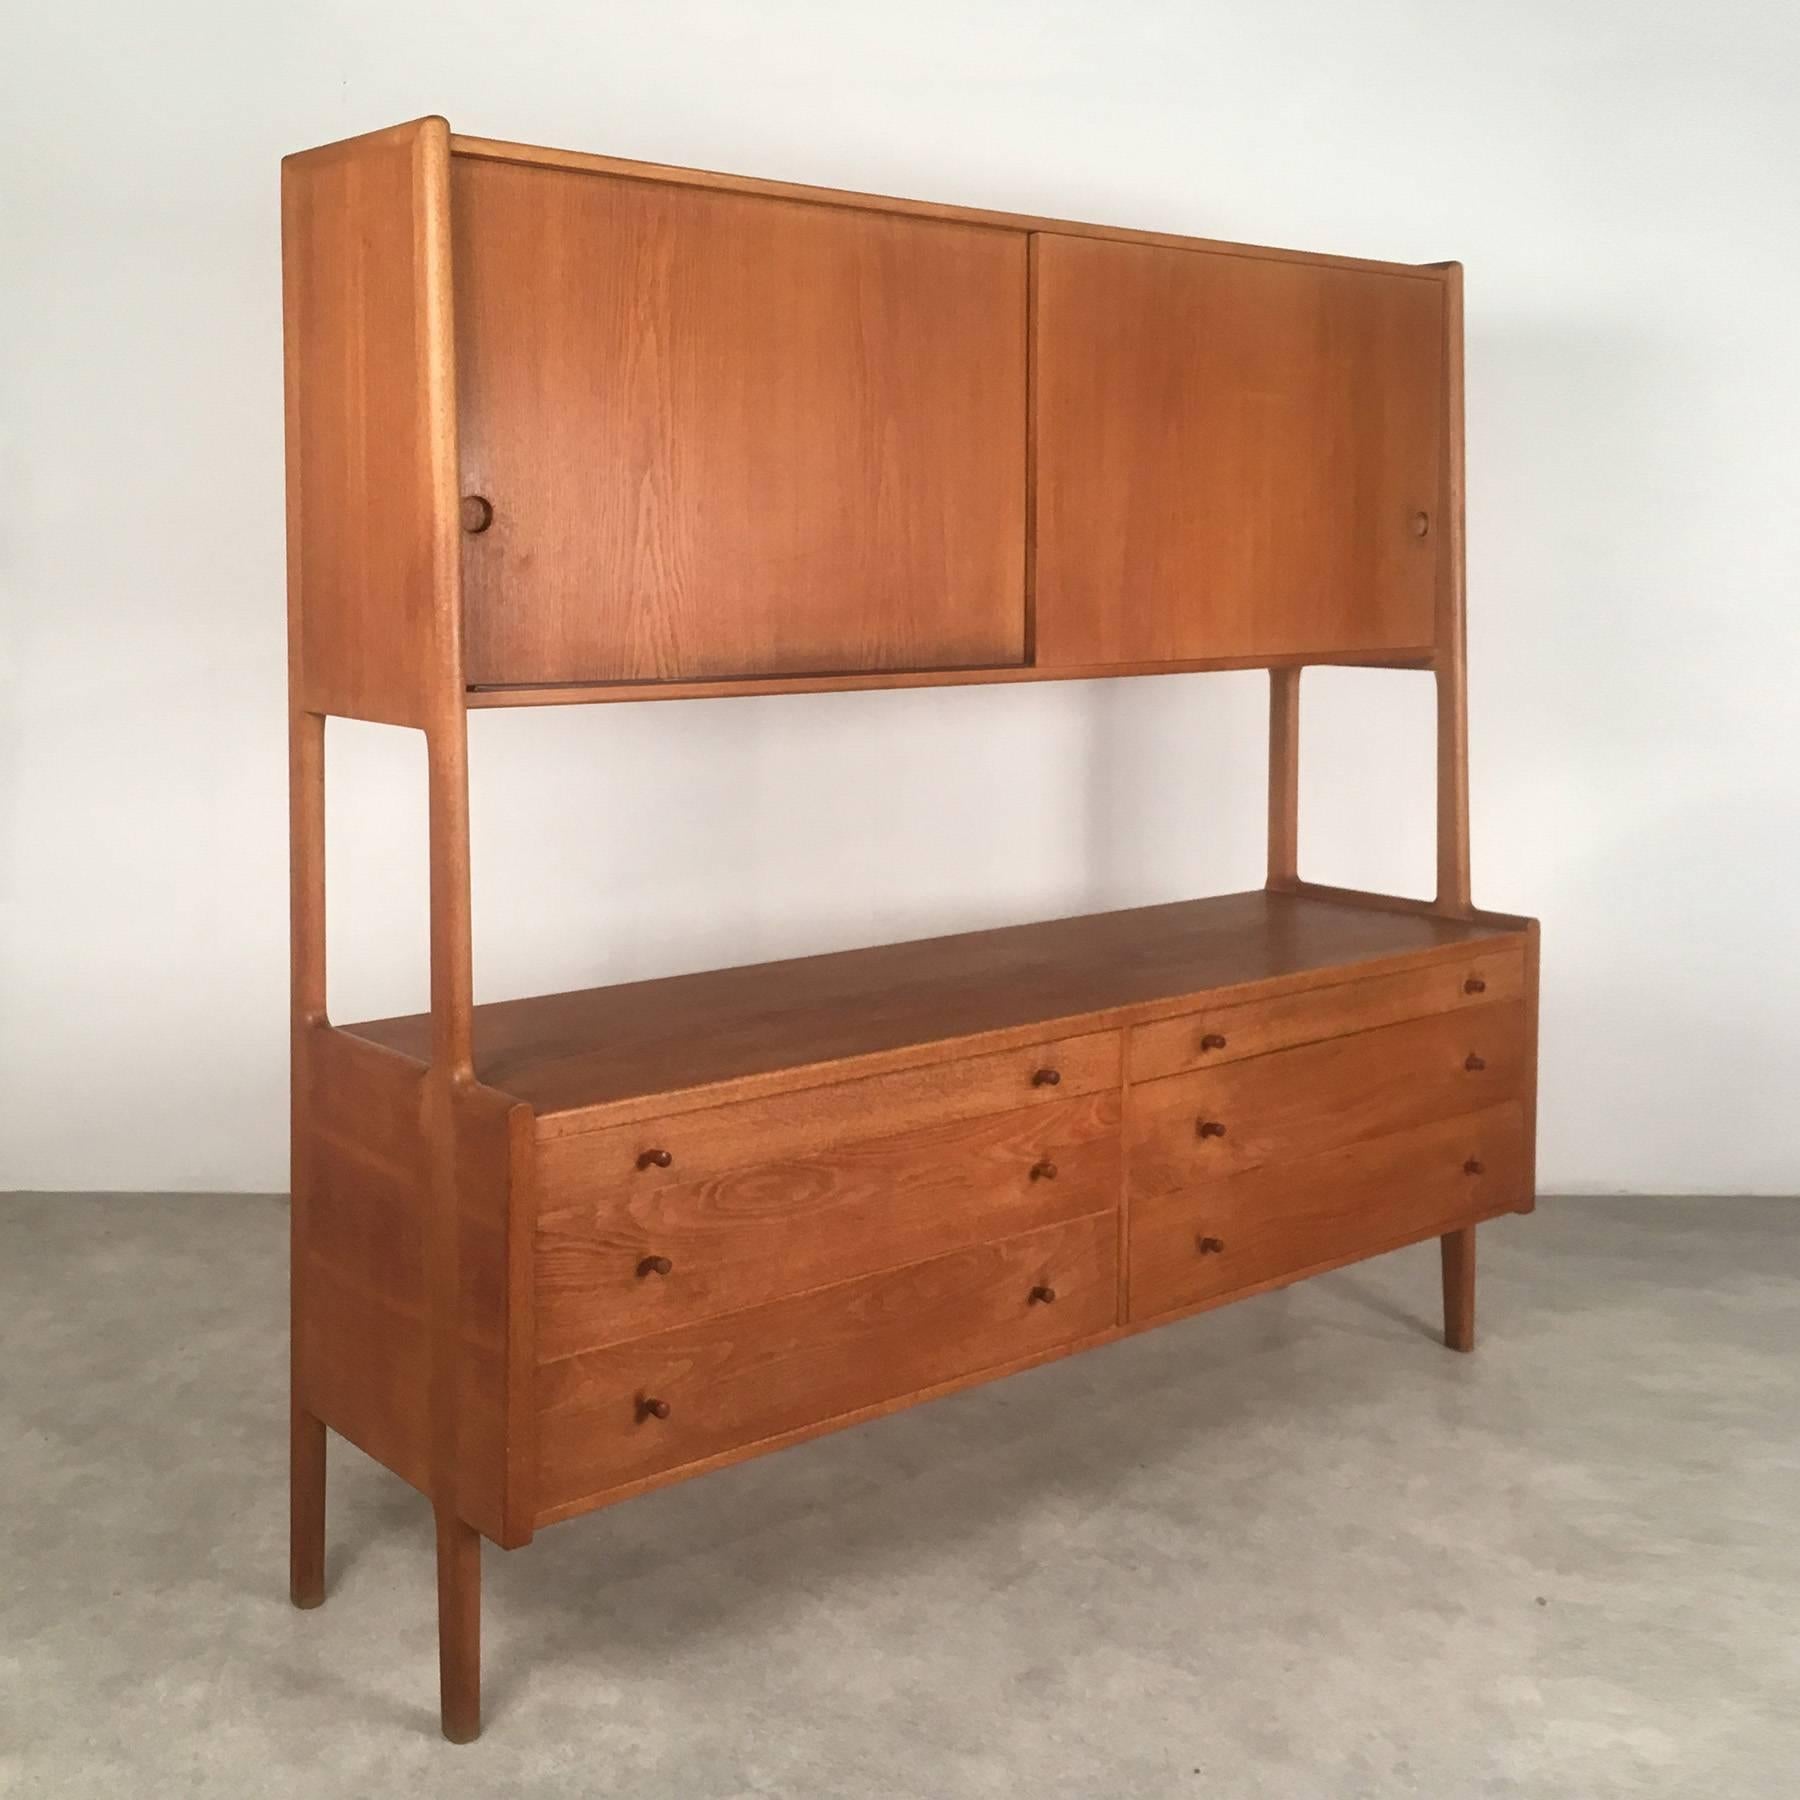 Fantastic highboard, designed in 1953 by Hans J. Wegner, manufactured in 1963 by Ry Møbler Denmark. The piece stands out for its extremely high quality craftsmanship and well thought out details. Its airy elegance and slightly organic design make